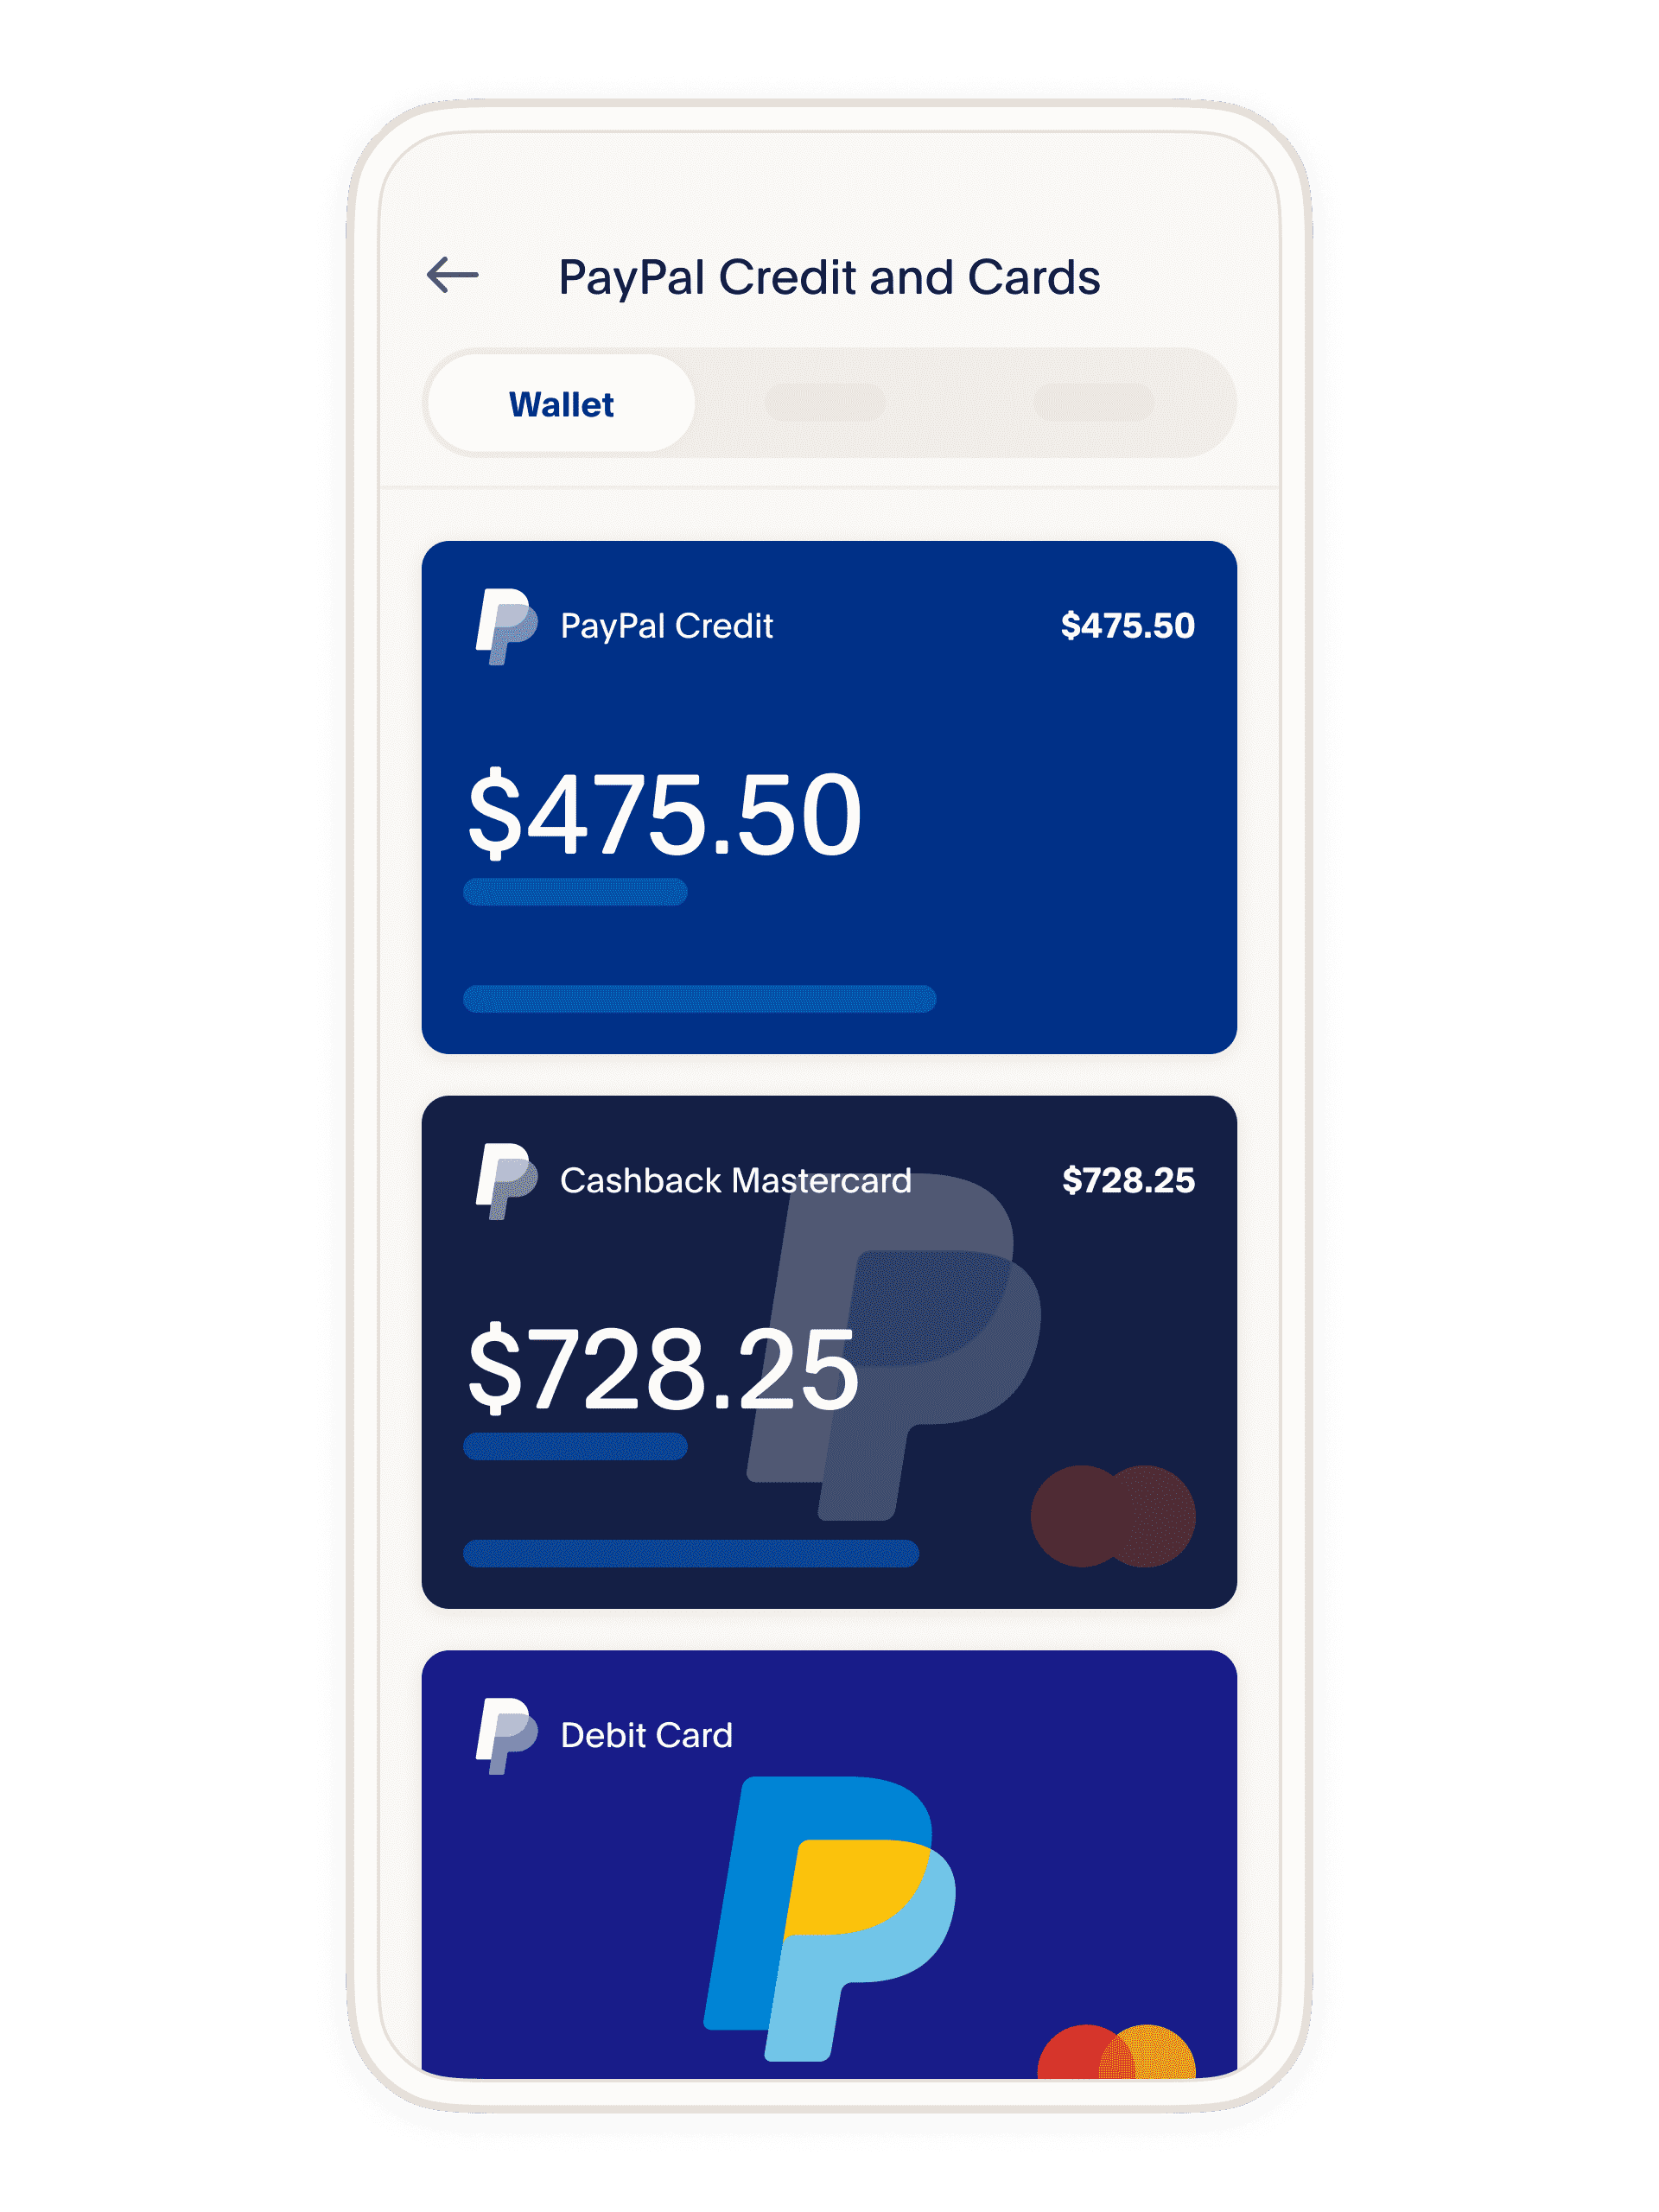 Can I use my PayPal card as a credit card?